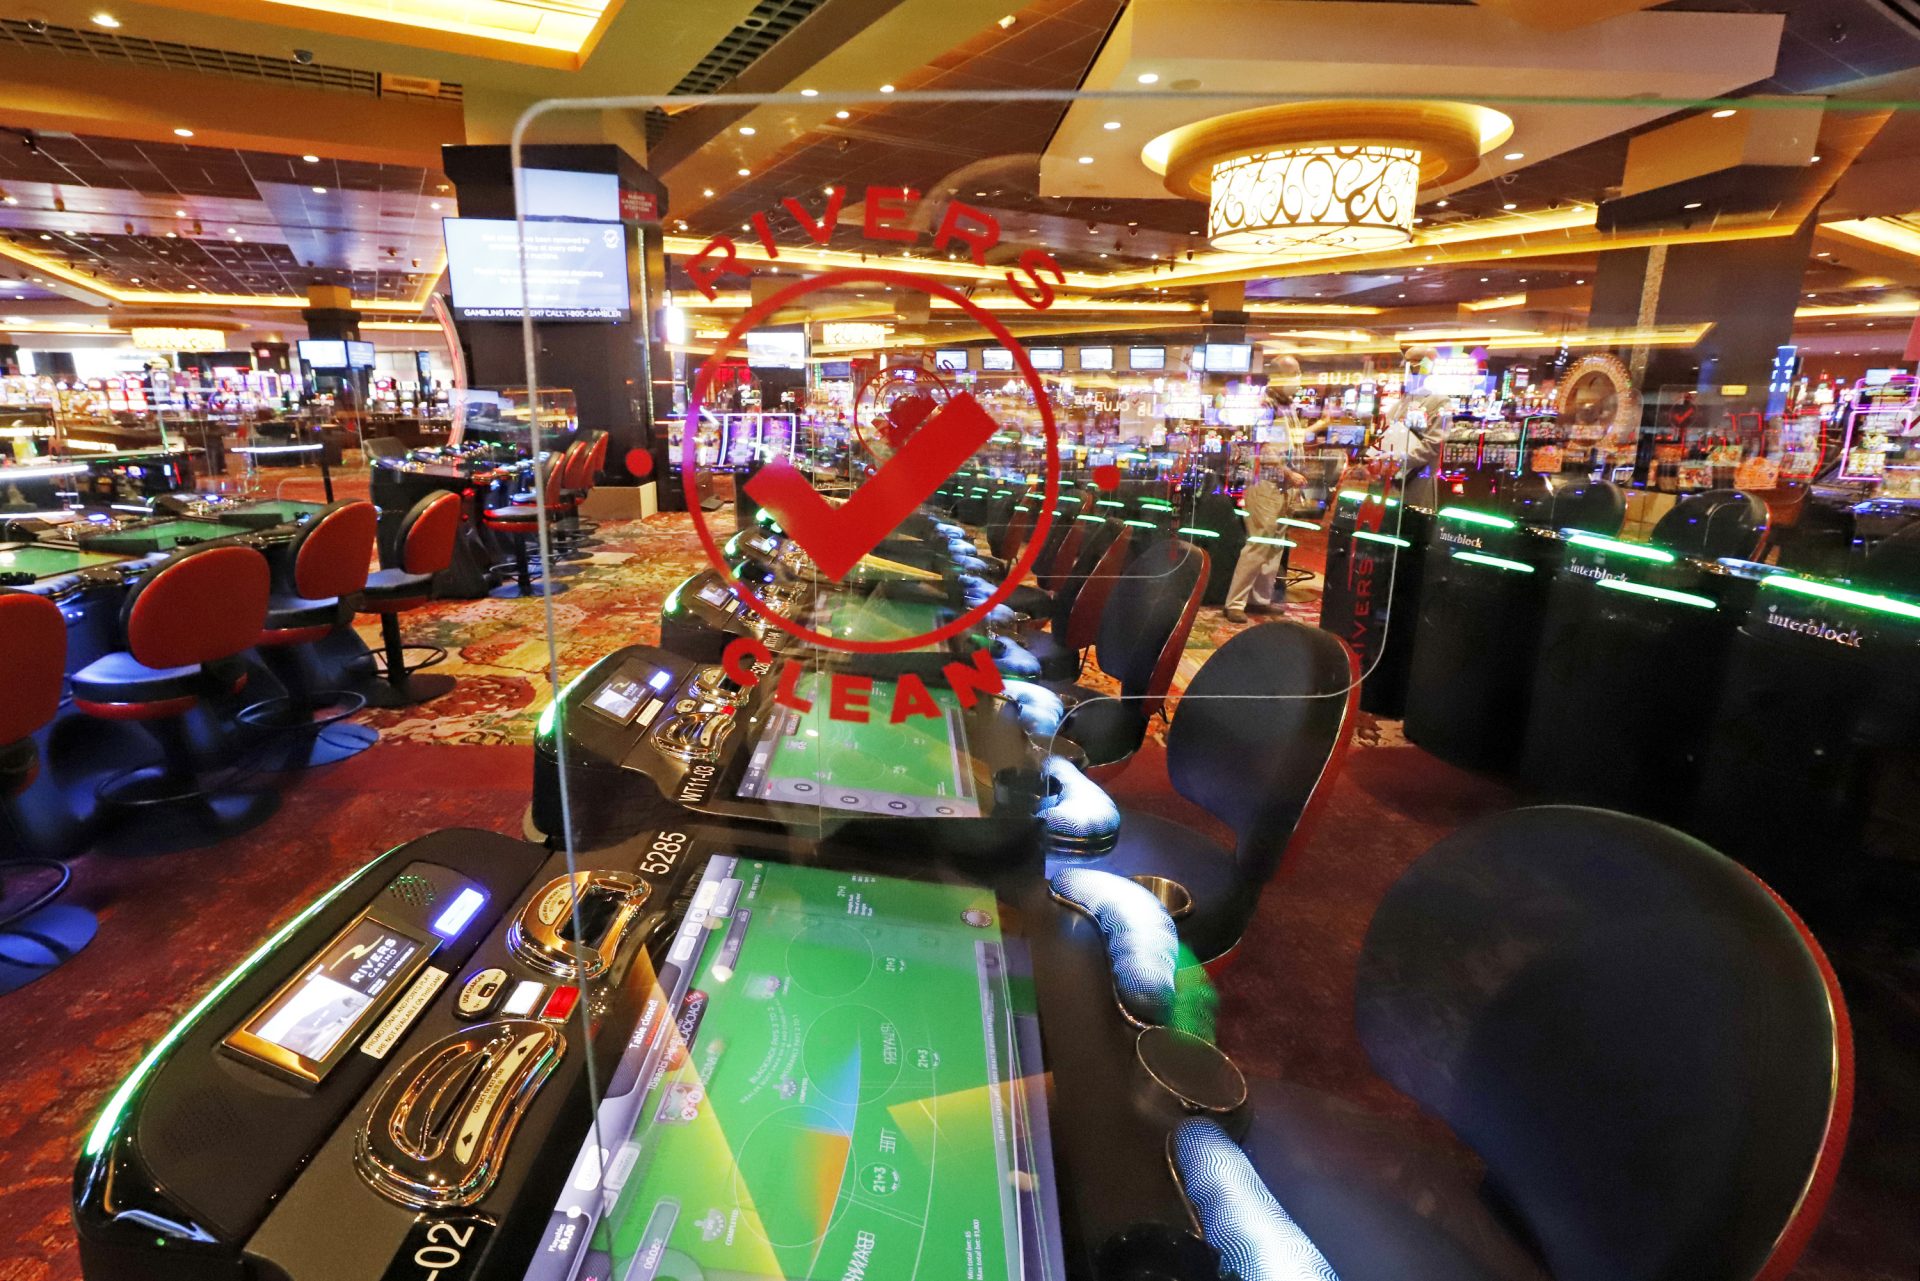 Plexiglas dividers separate video gaming machines at Rivers Casino in Pittsburgh on Monday, June 8, 2020. The casino is scheduled to re-open at 9 a.m. Tuesday, operating at 50% capacity to comply with Pennsylvania Gaming Control Board COVID-19 protocols.